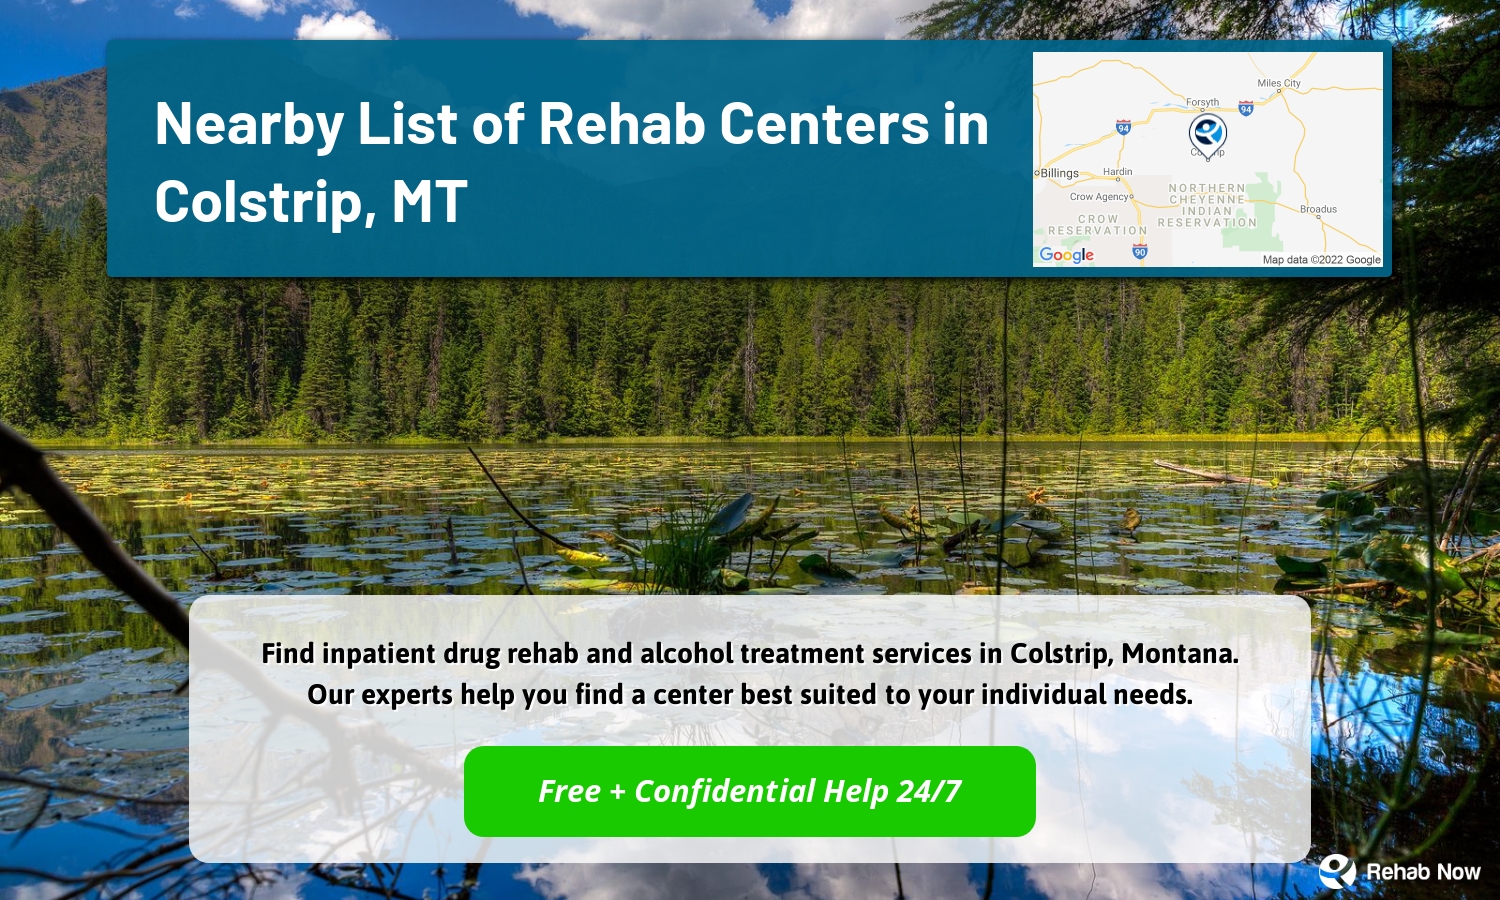 Find inpatient drug rehab and alcohol treatment services in Colstrip, Montana. Our experts help you find a center best suited to your individual needs.